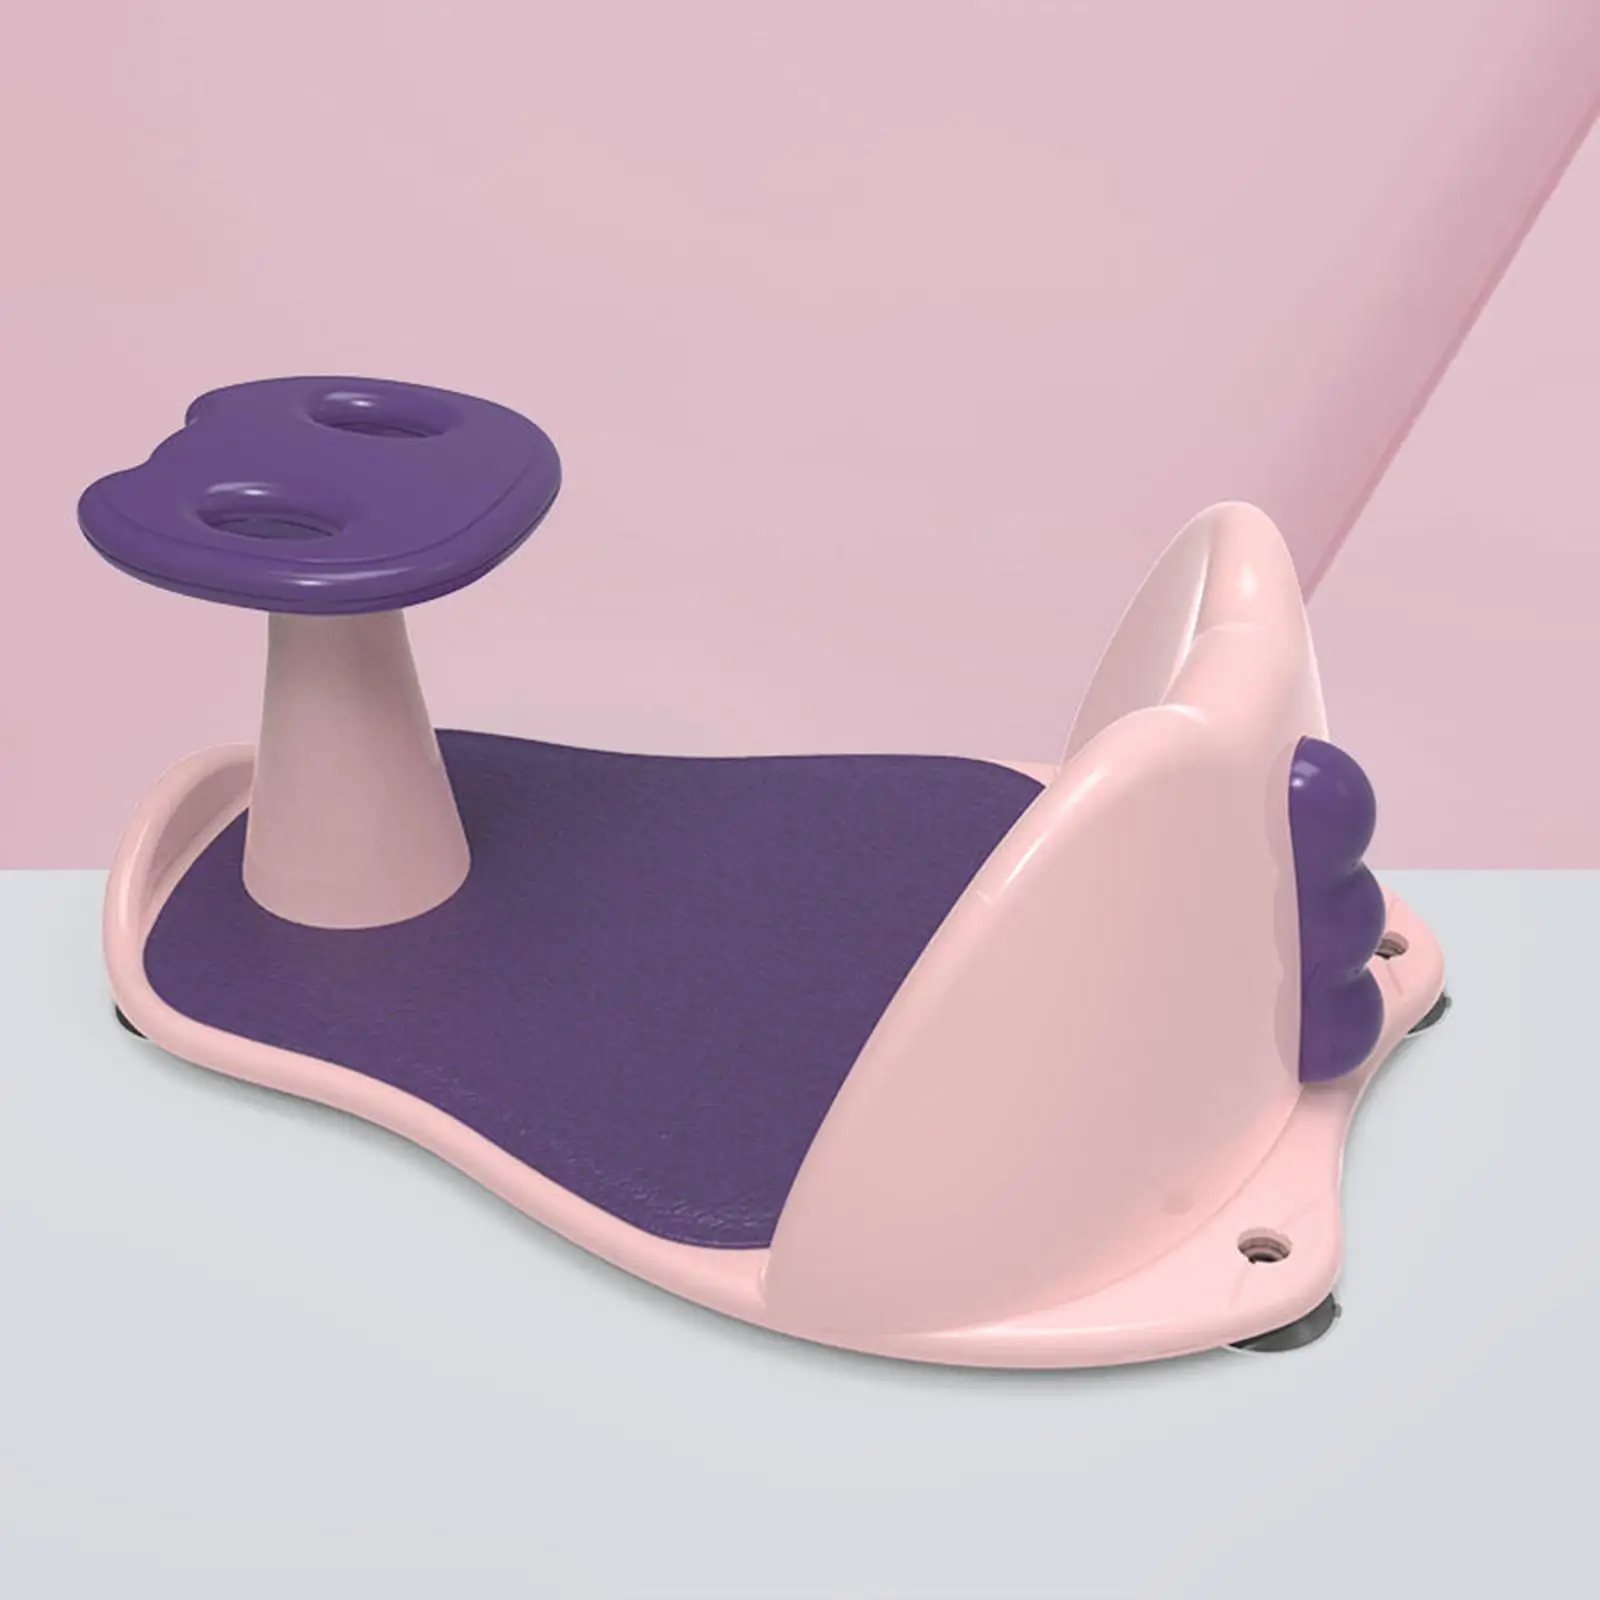 Contoured Seat Open-Side Drain Holes Seat Tub Bathtub Seat for Babies Sit-Up Bathing in the Sink Counter